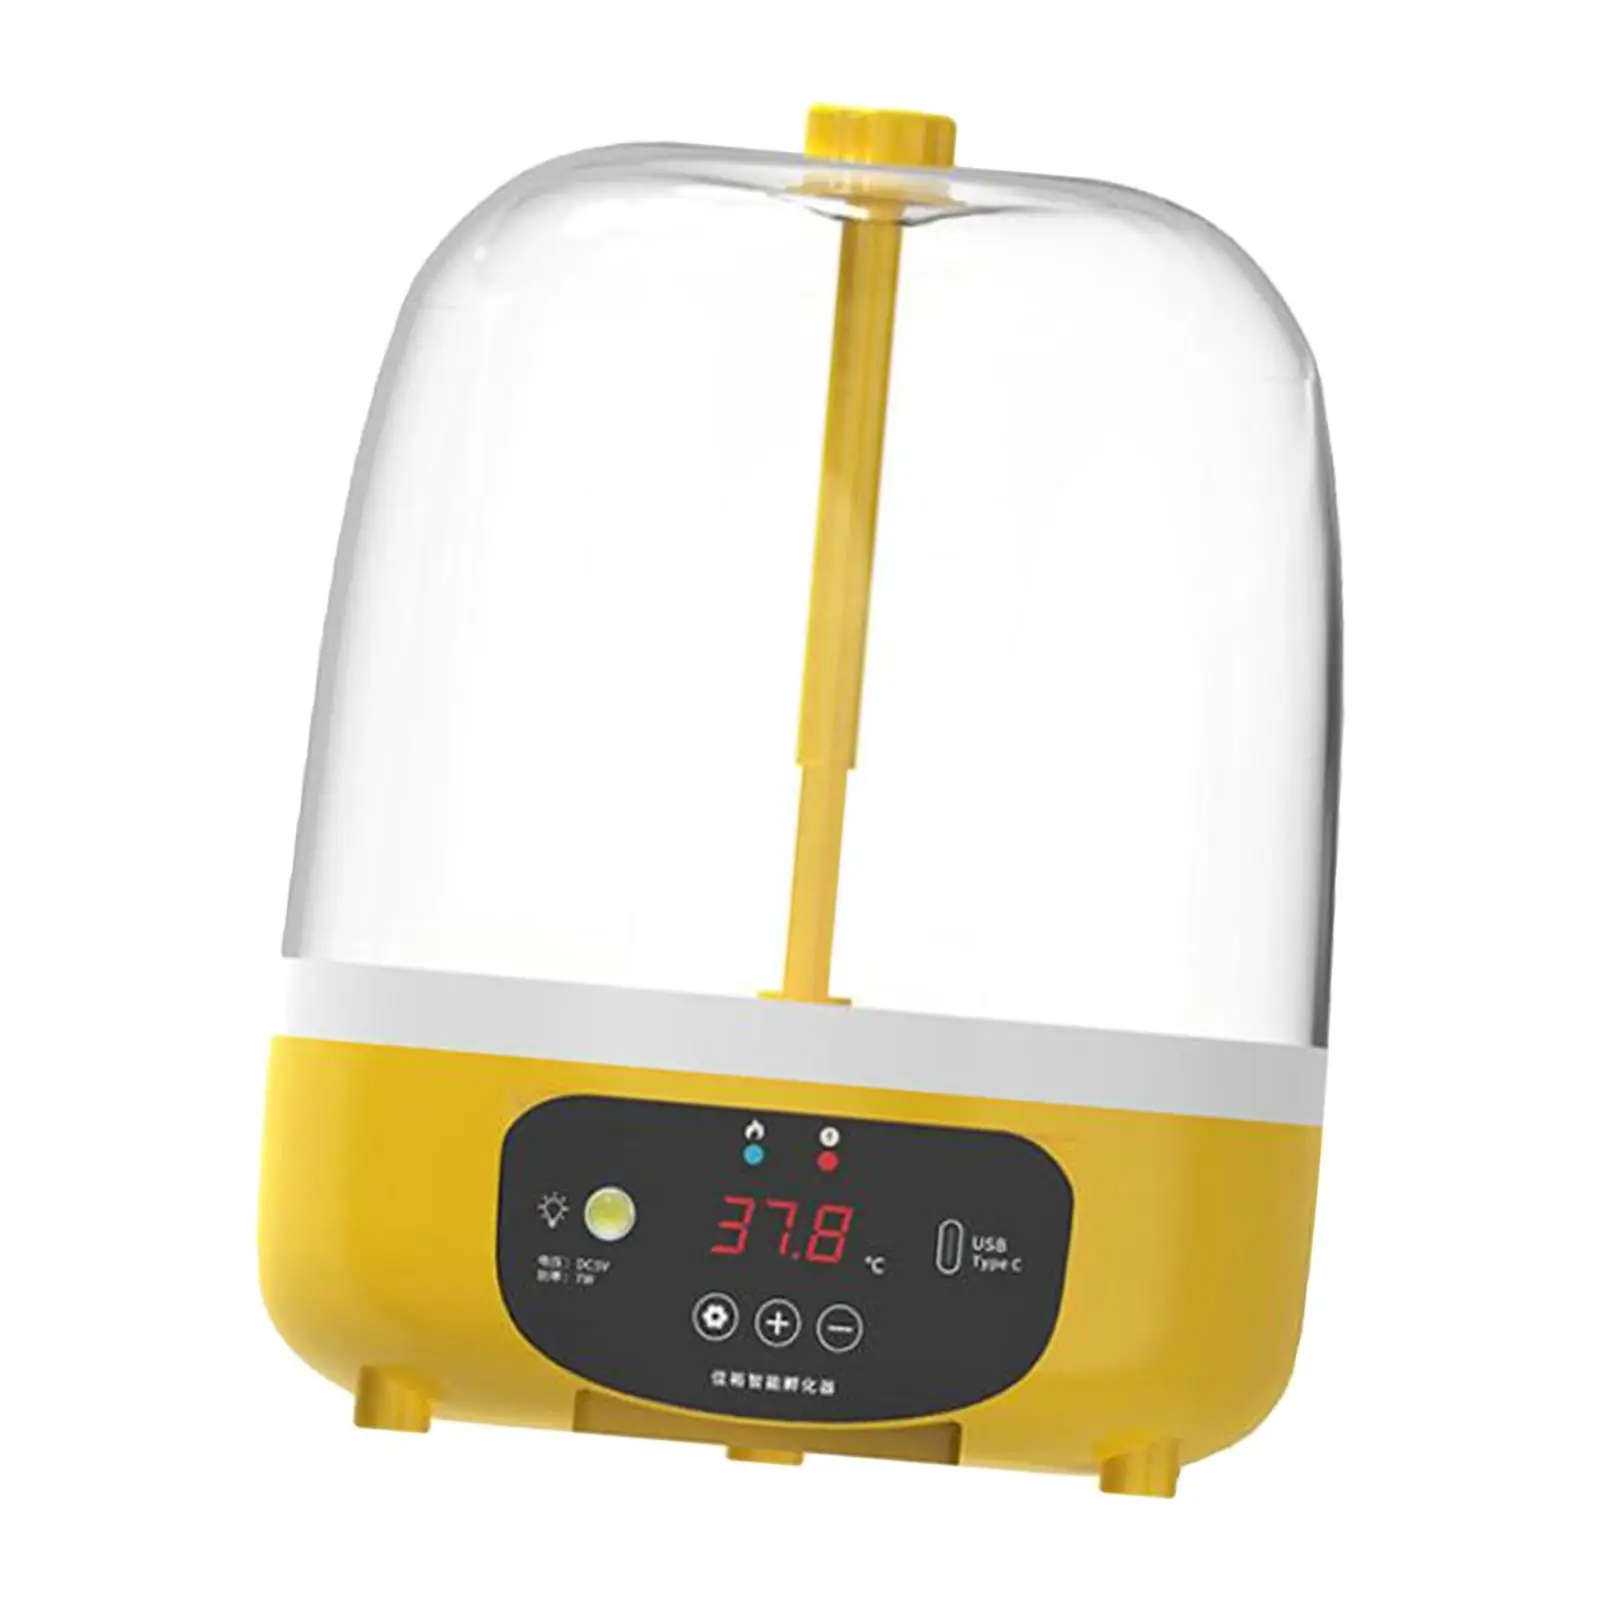 Portable Poultry Hatcher 5 Eggs Digital Automatic Egg Incubator for Hatching